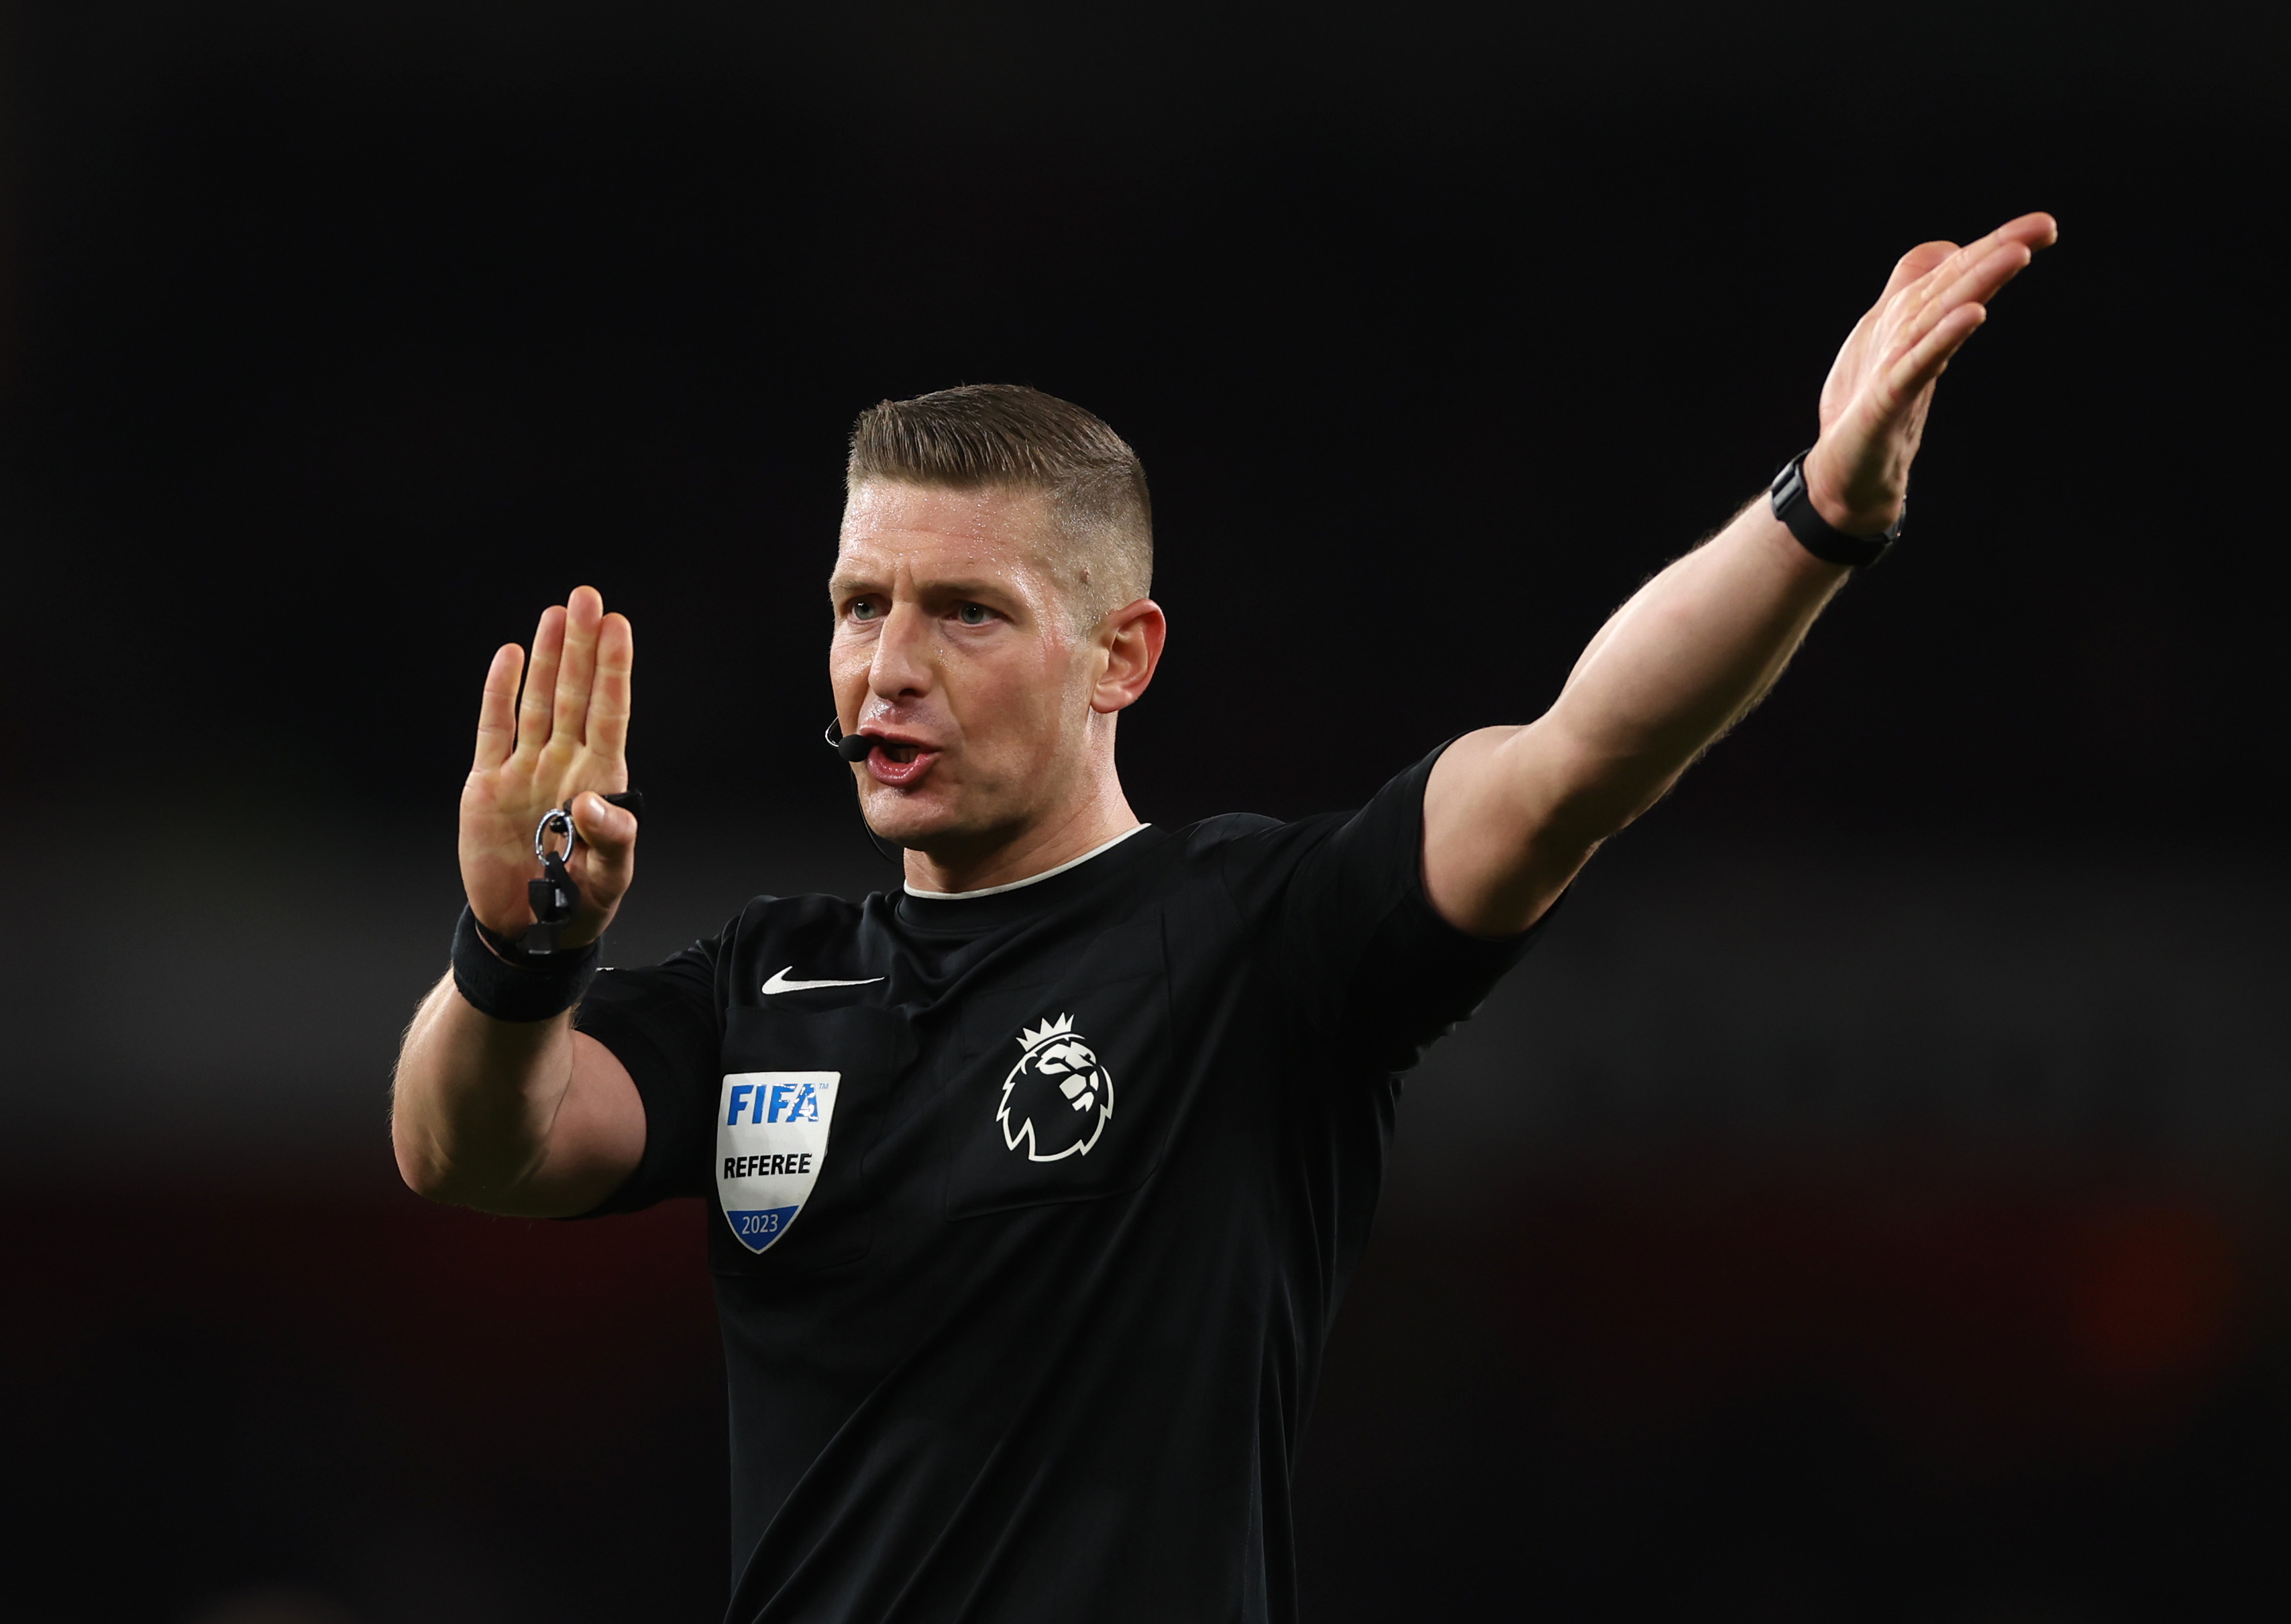 Premier League’s controversial refereeing decision for Newcastle game CaughtOffside